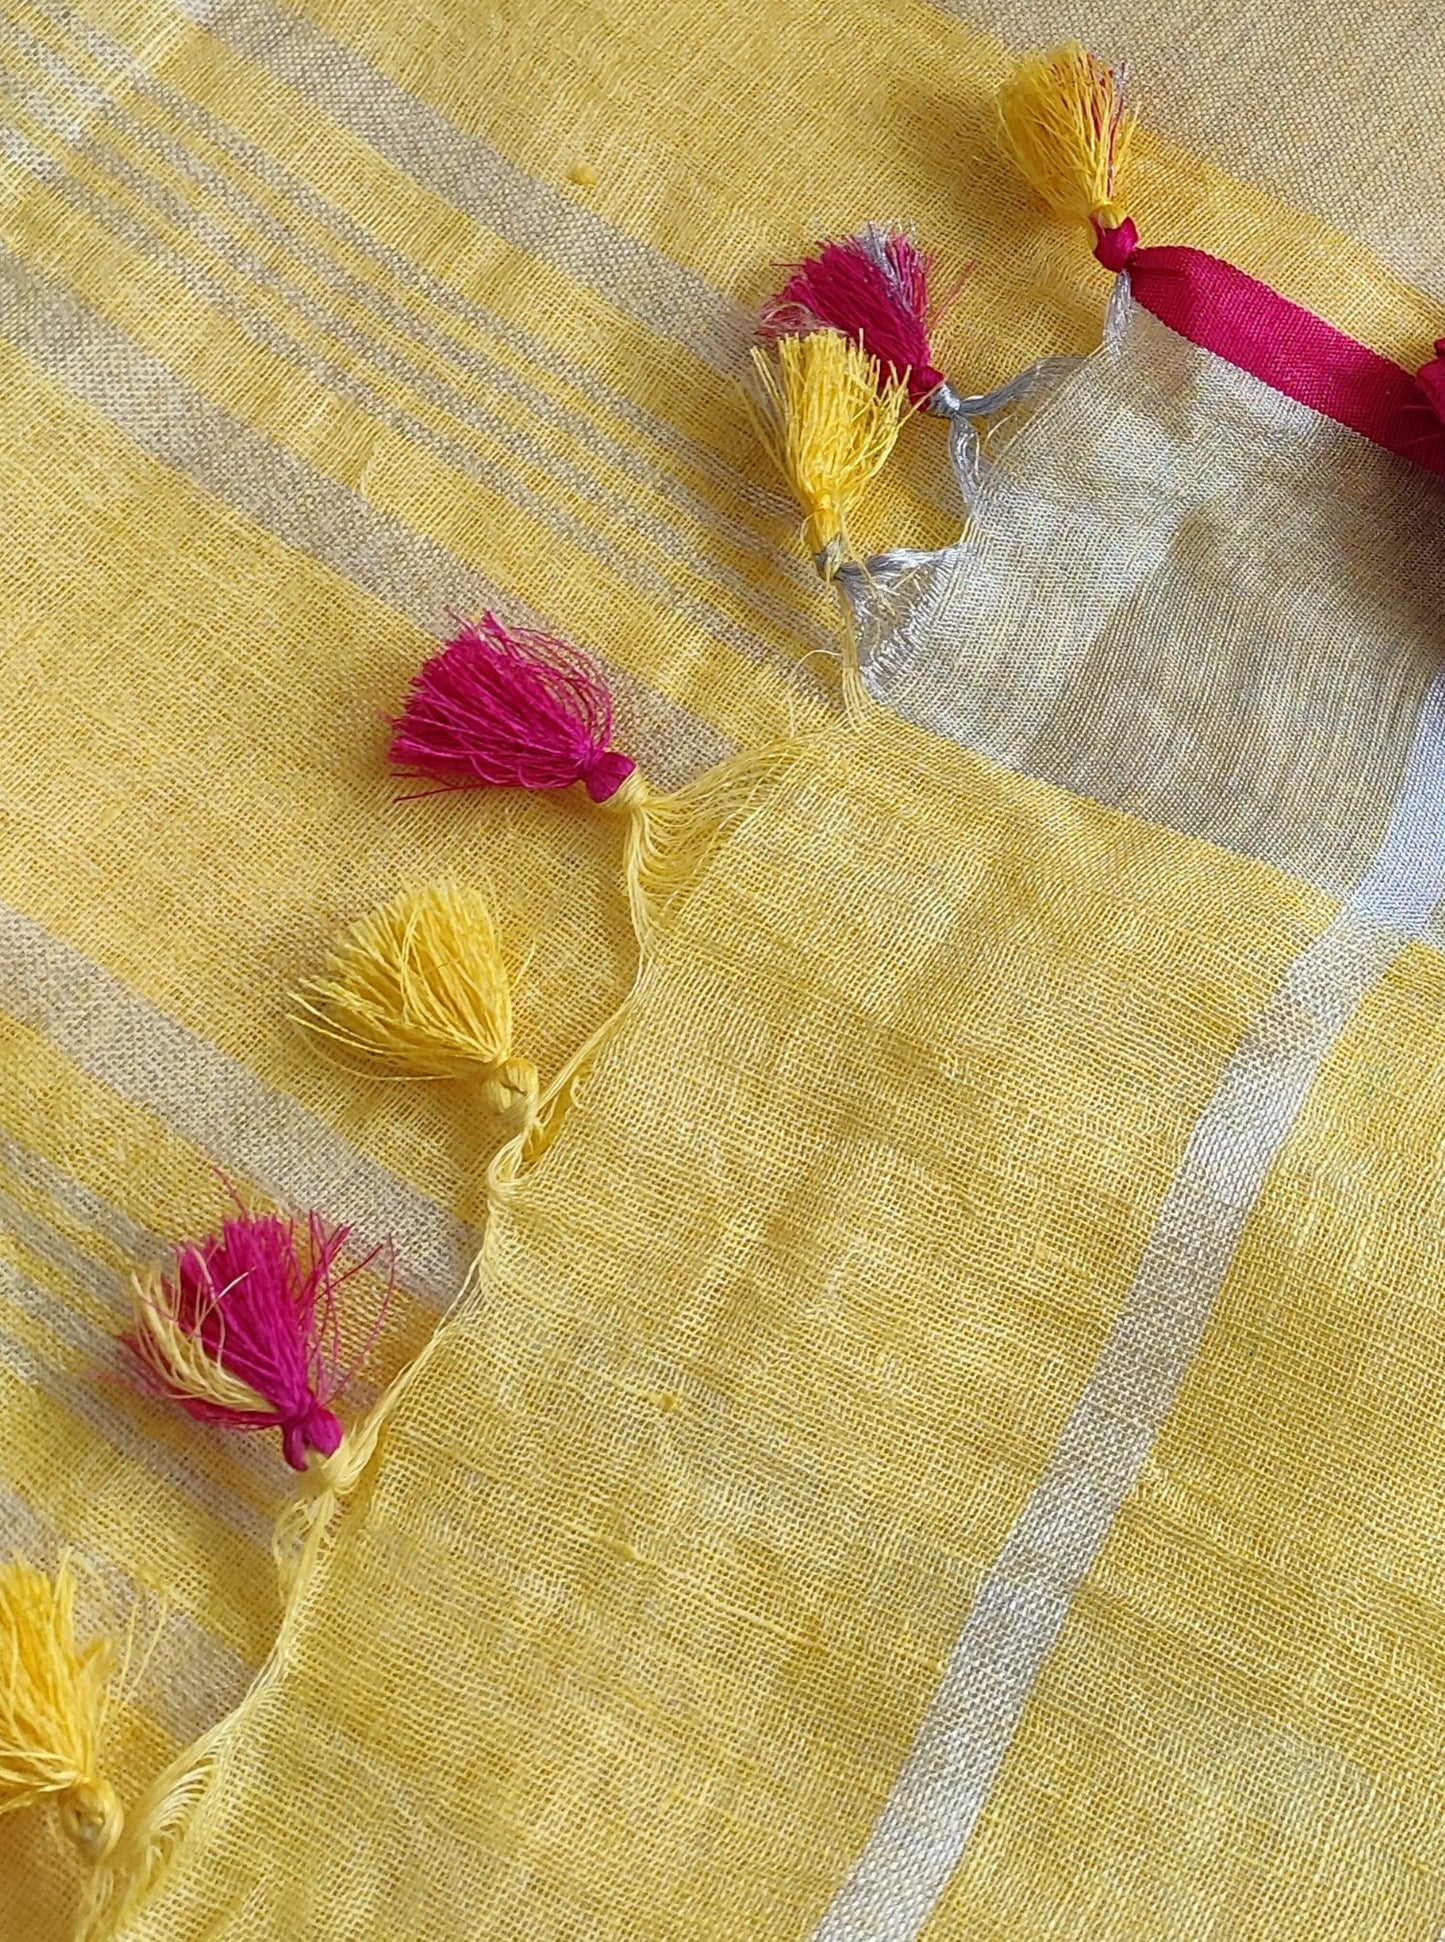 Lemon Yellow Pure Linen Embroidered Saree with Tassels Detailing and Hot Pink Blouse